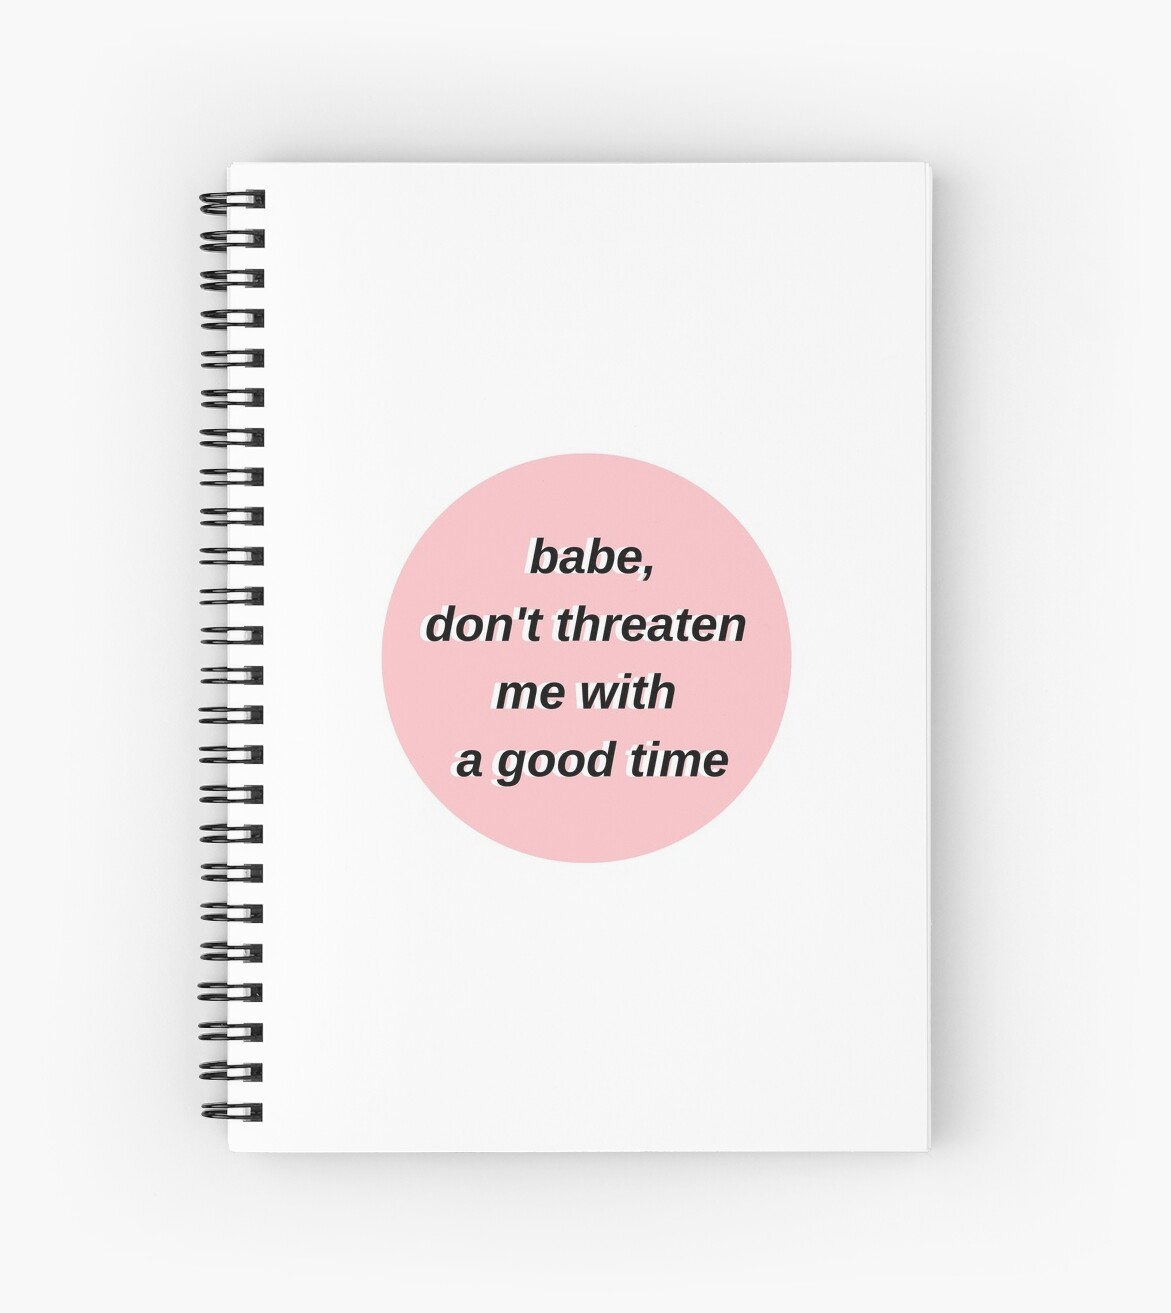 London Boy Taylor Swift Lover Lyrics Don T Threaten Me With A Good Time Spiral Notebook By Erinaceous Redbubble